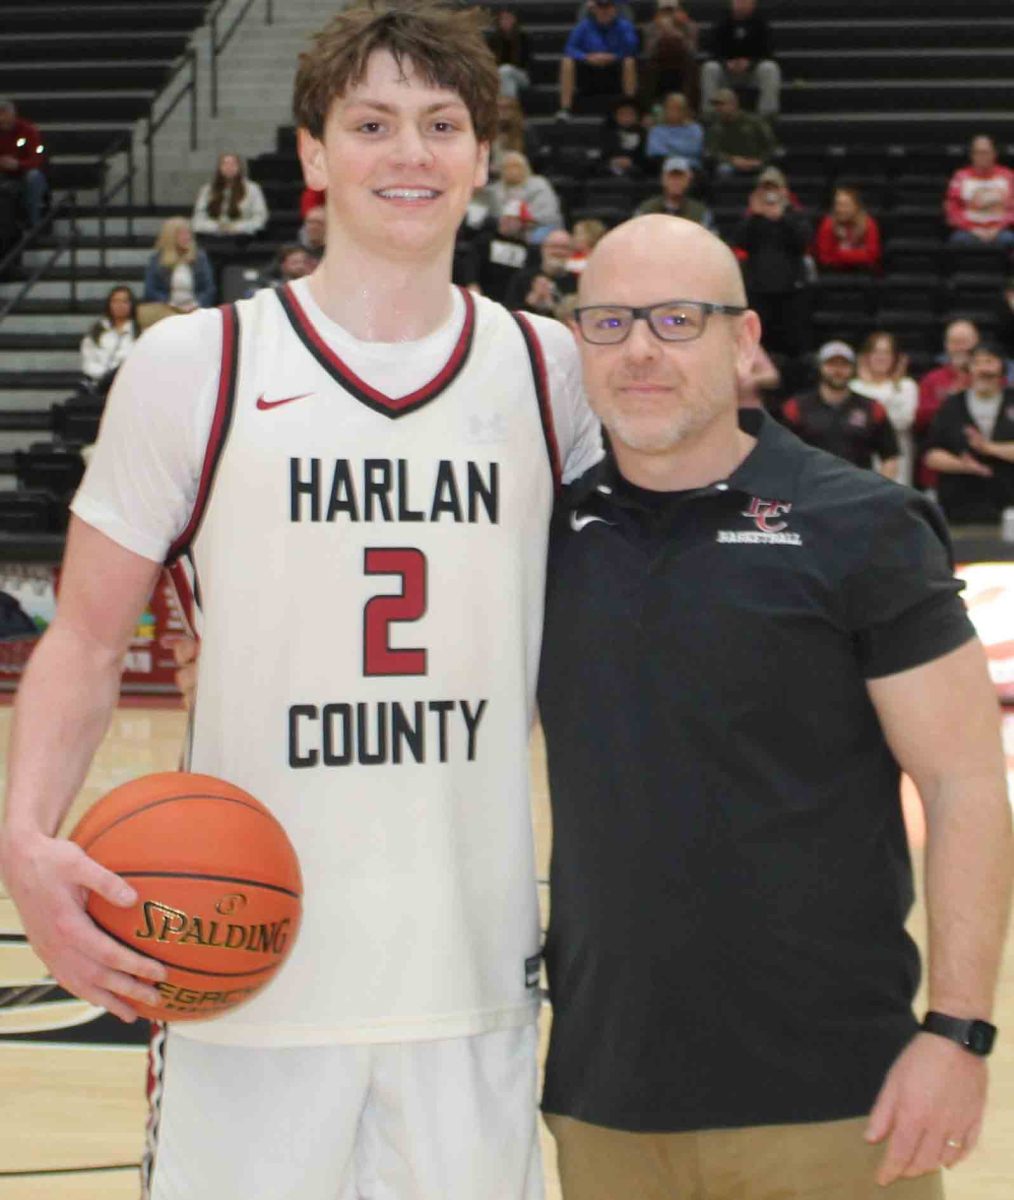 Harlan County guard Trent Noah received the game ball from HCHS coach Kyle Jones after breaking the county scoring record.